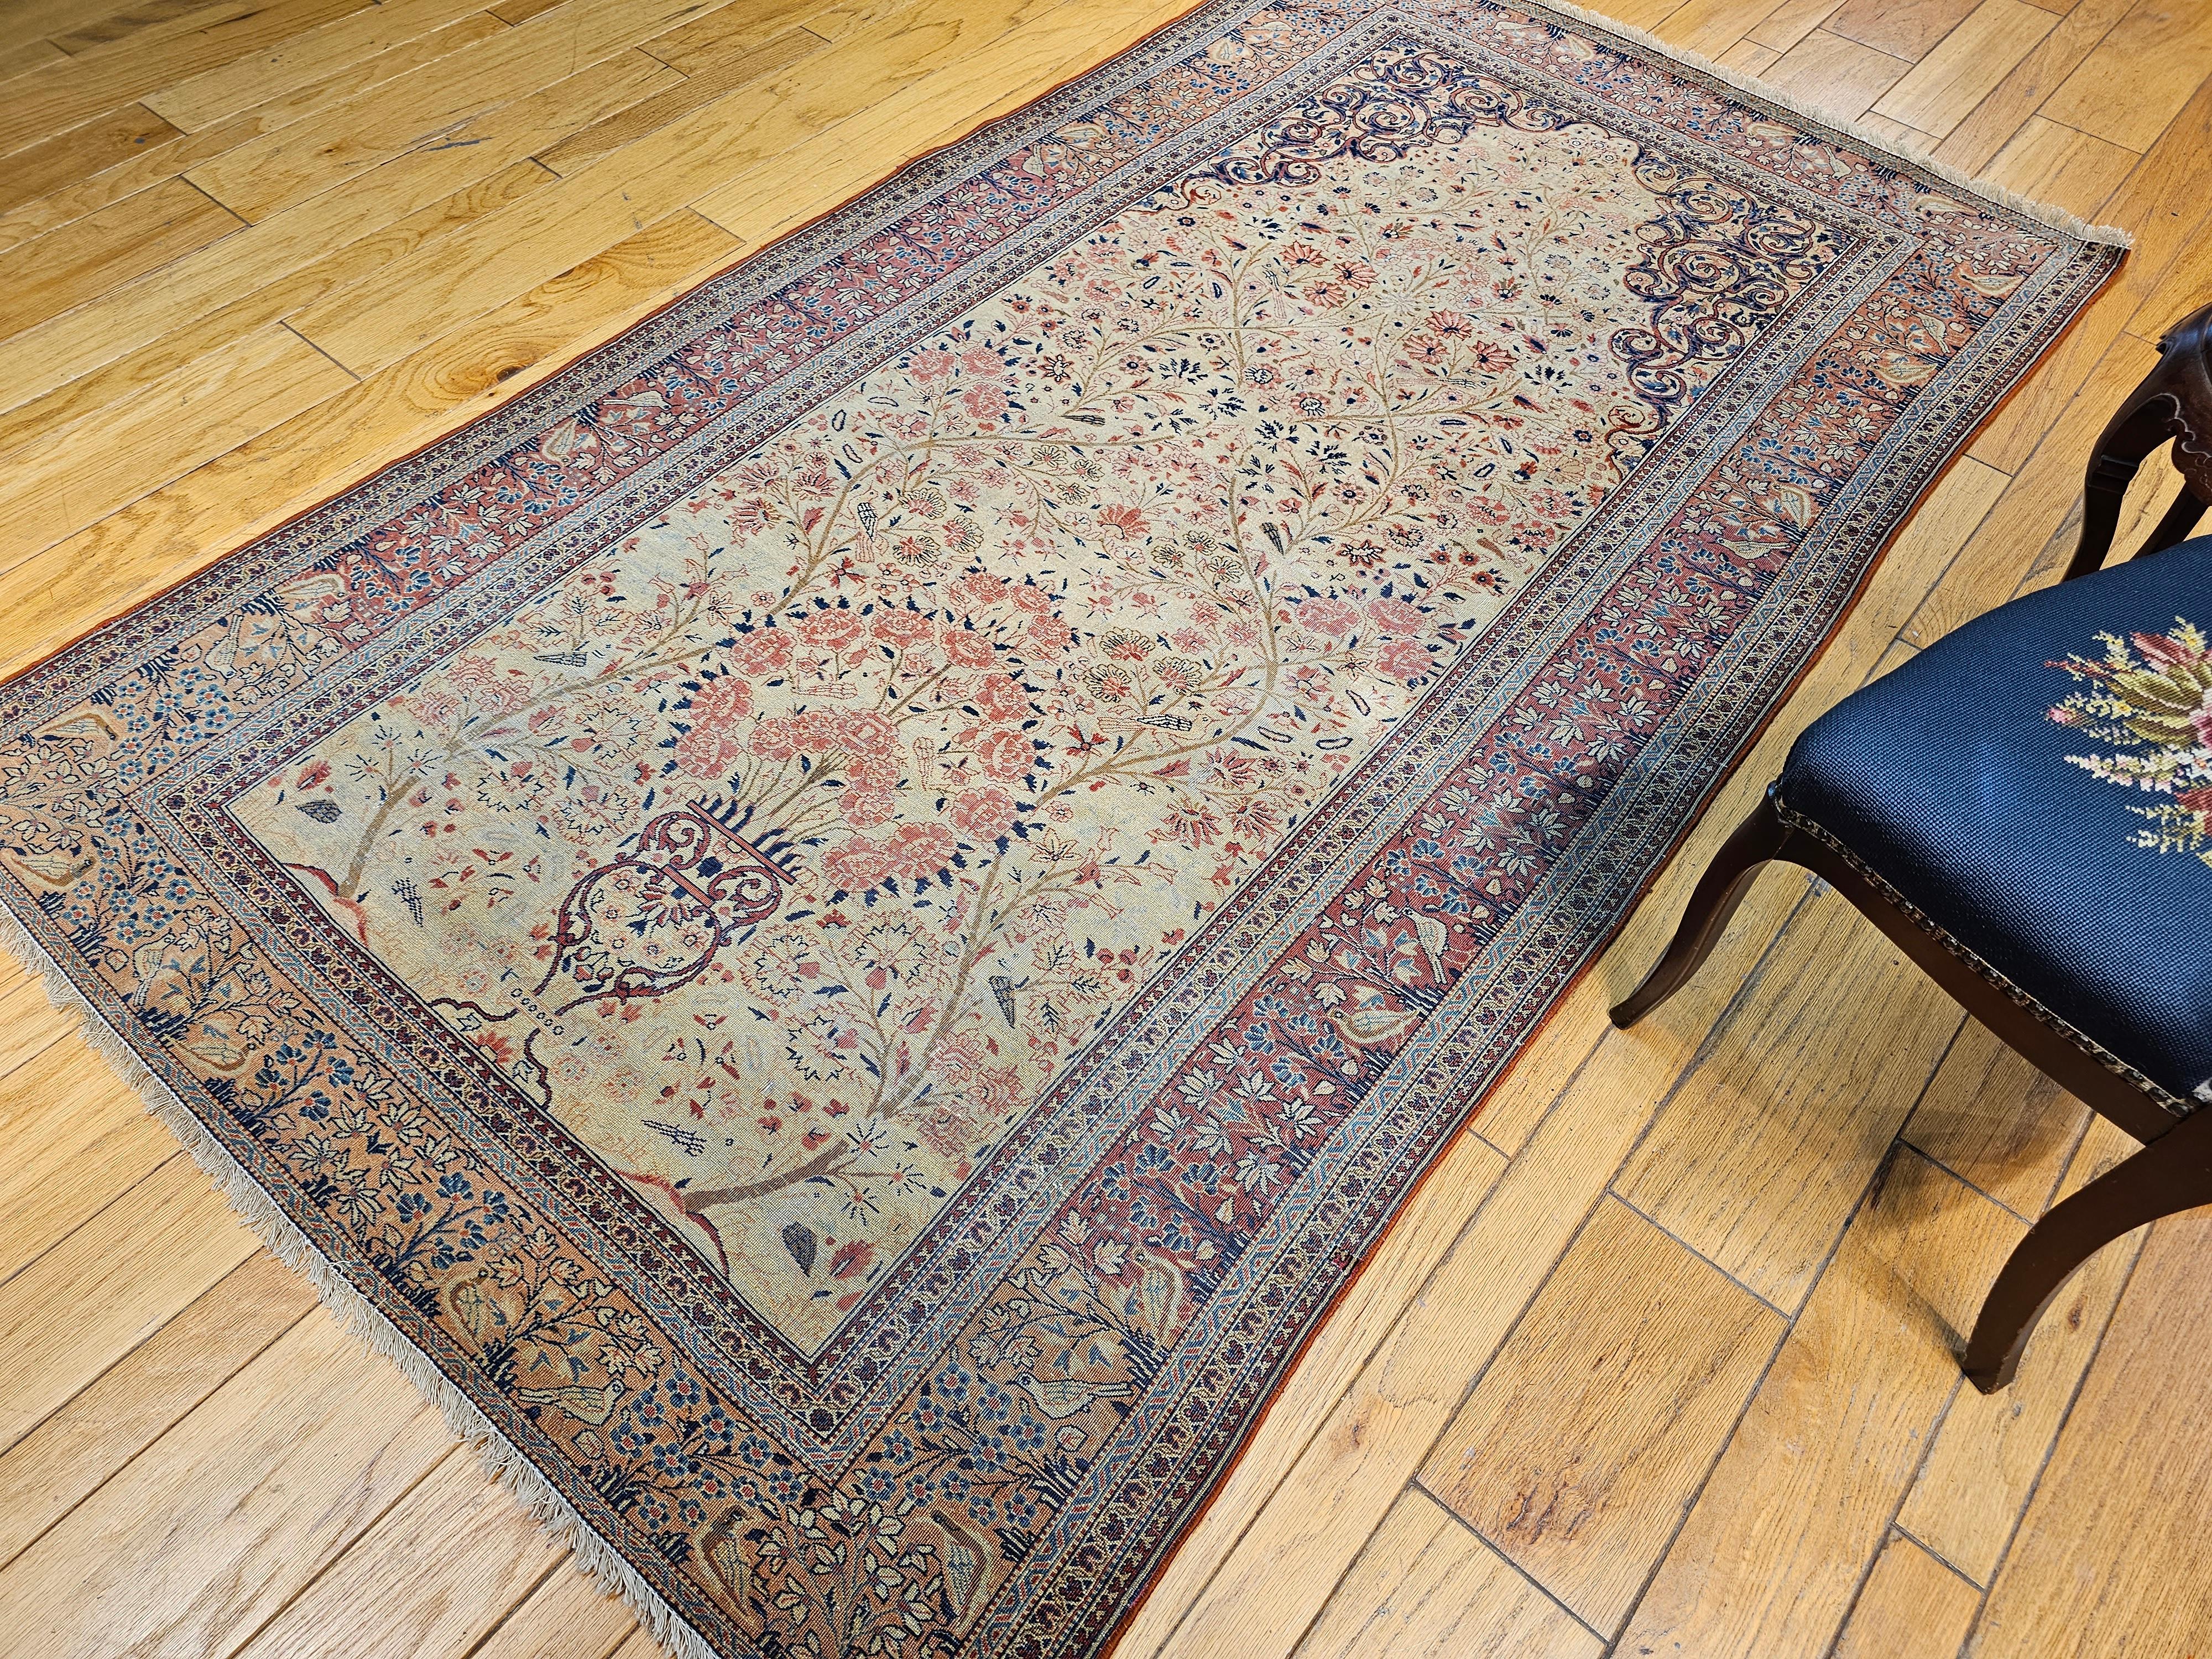 19th Century Persian Kashan “Tree of Life” Vase Rug in Ivory, Brick Red, Navy For Sale 13